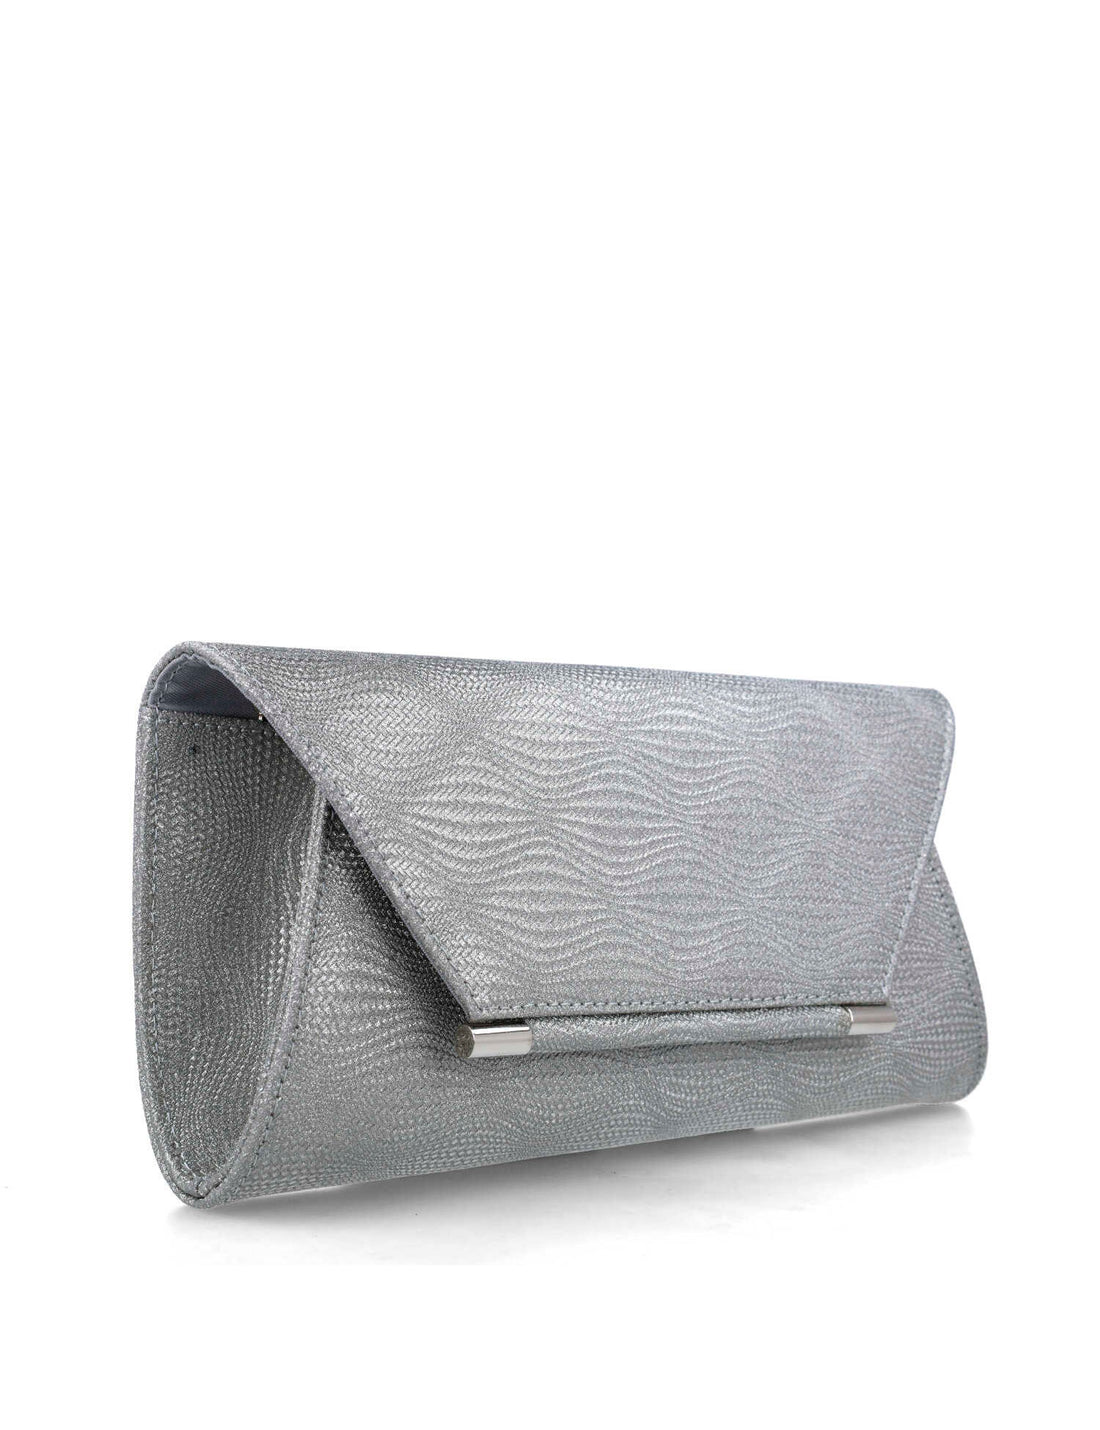 Grey Clutch With Silver Hardware_85642_09_02